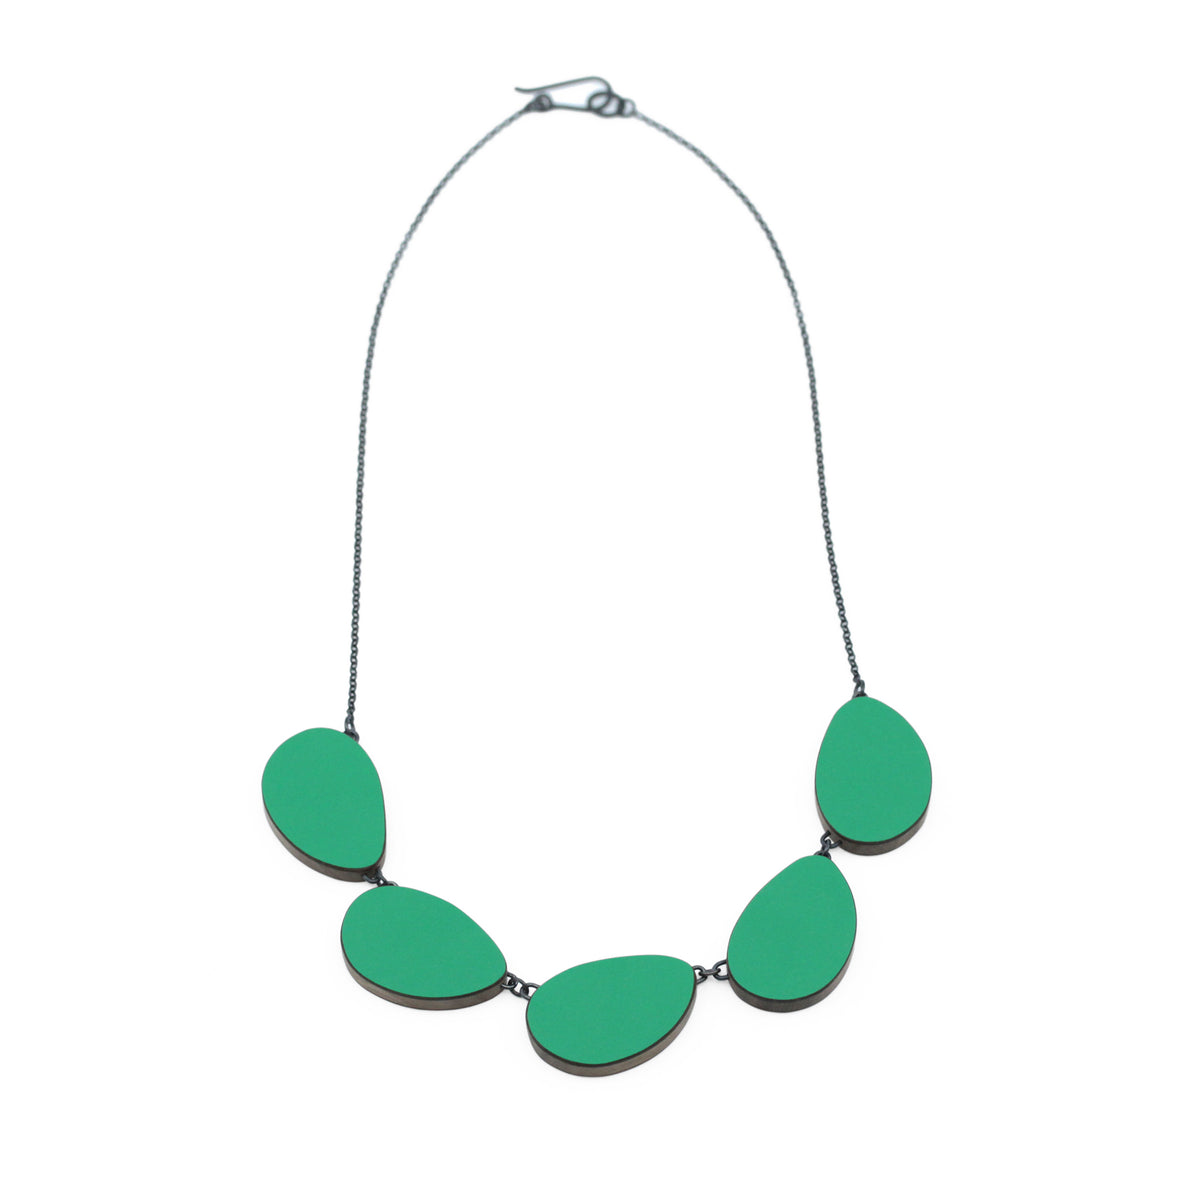 Five part curve necklace (reversible) - grass green and blue